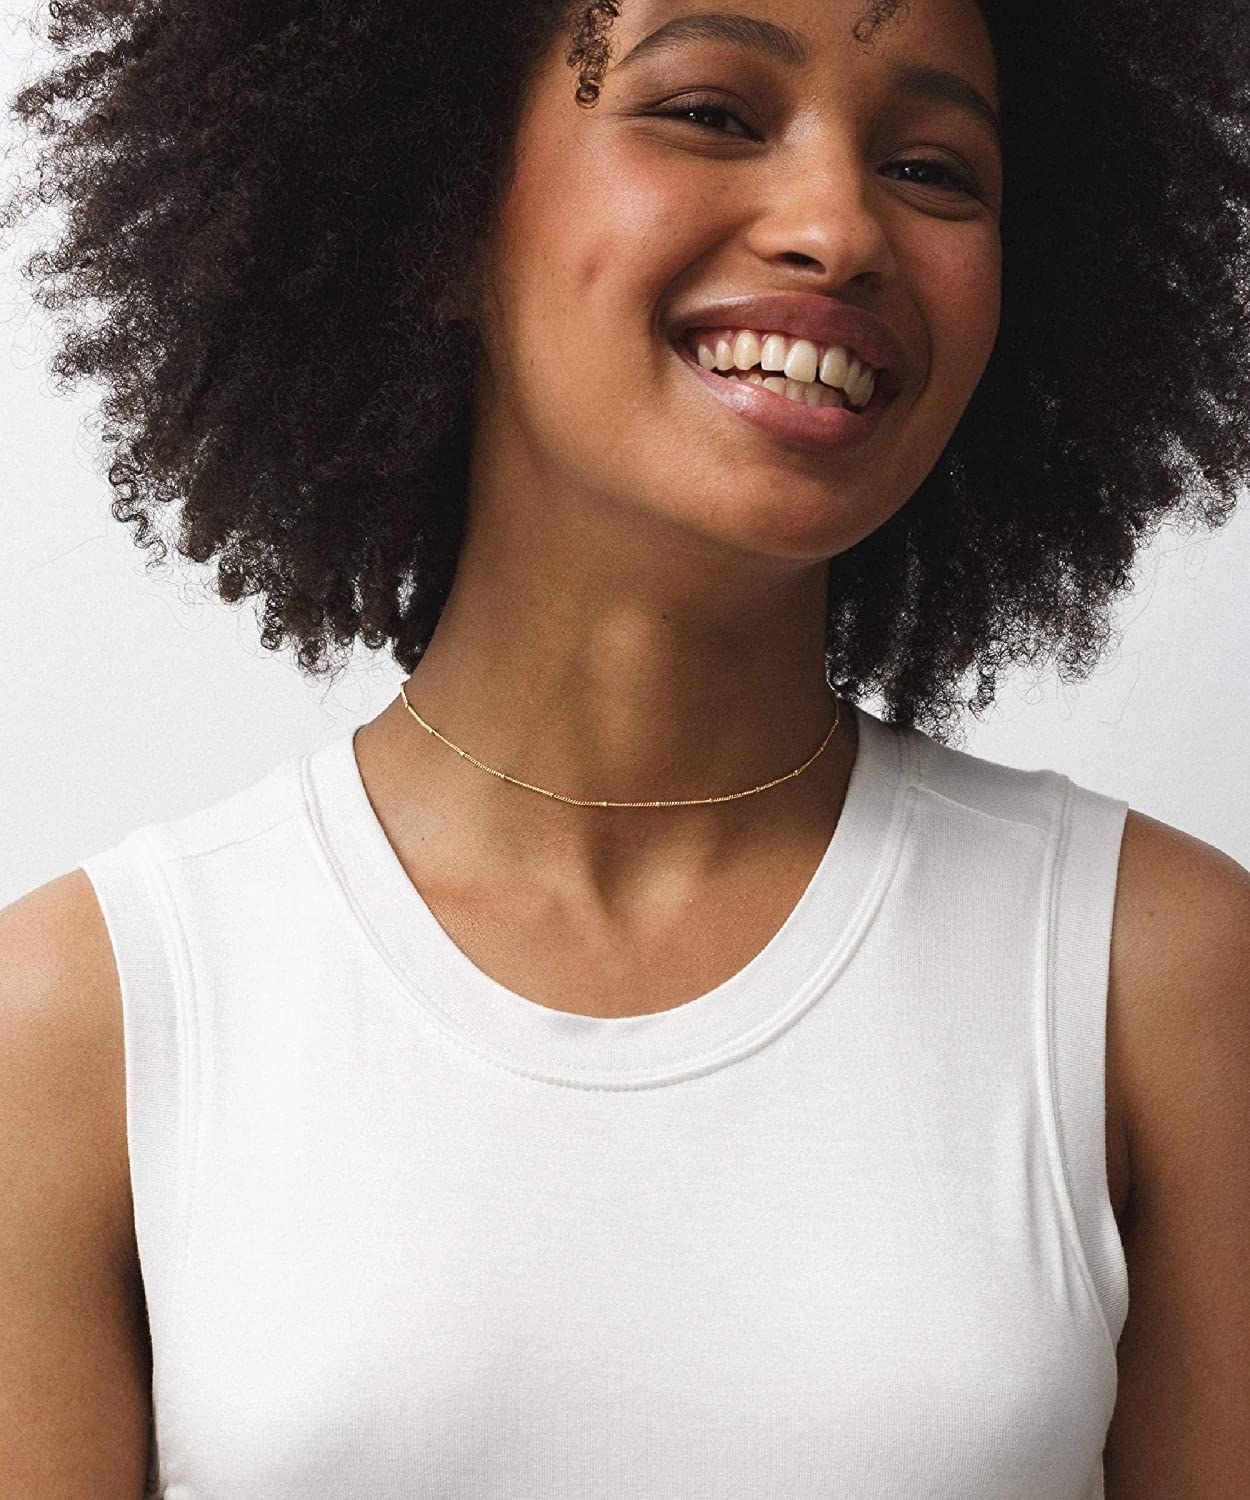 Model wearing the choker-length necklace